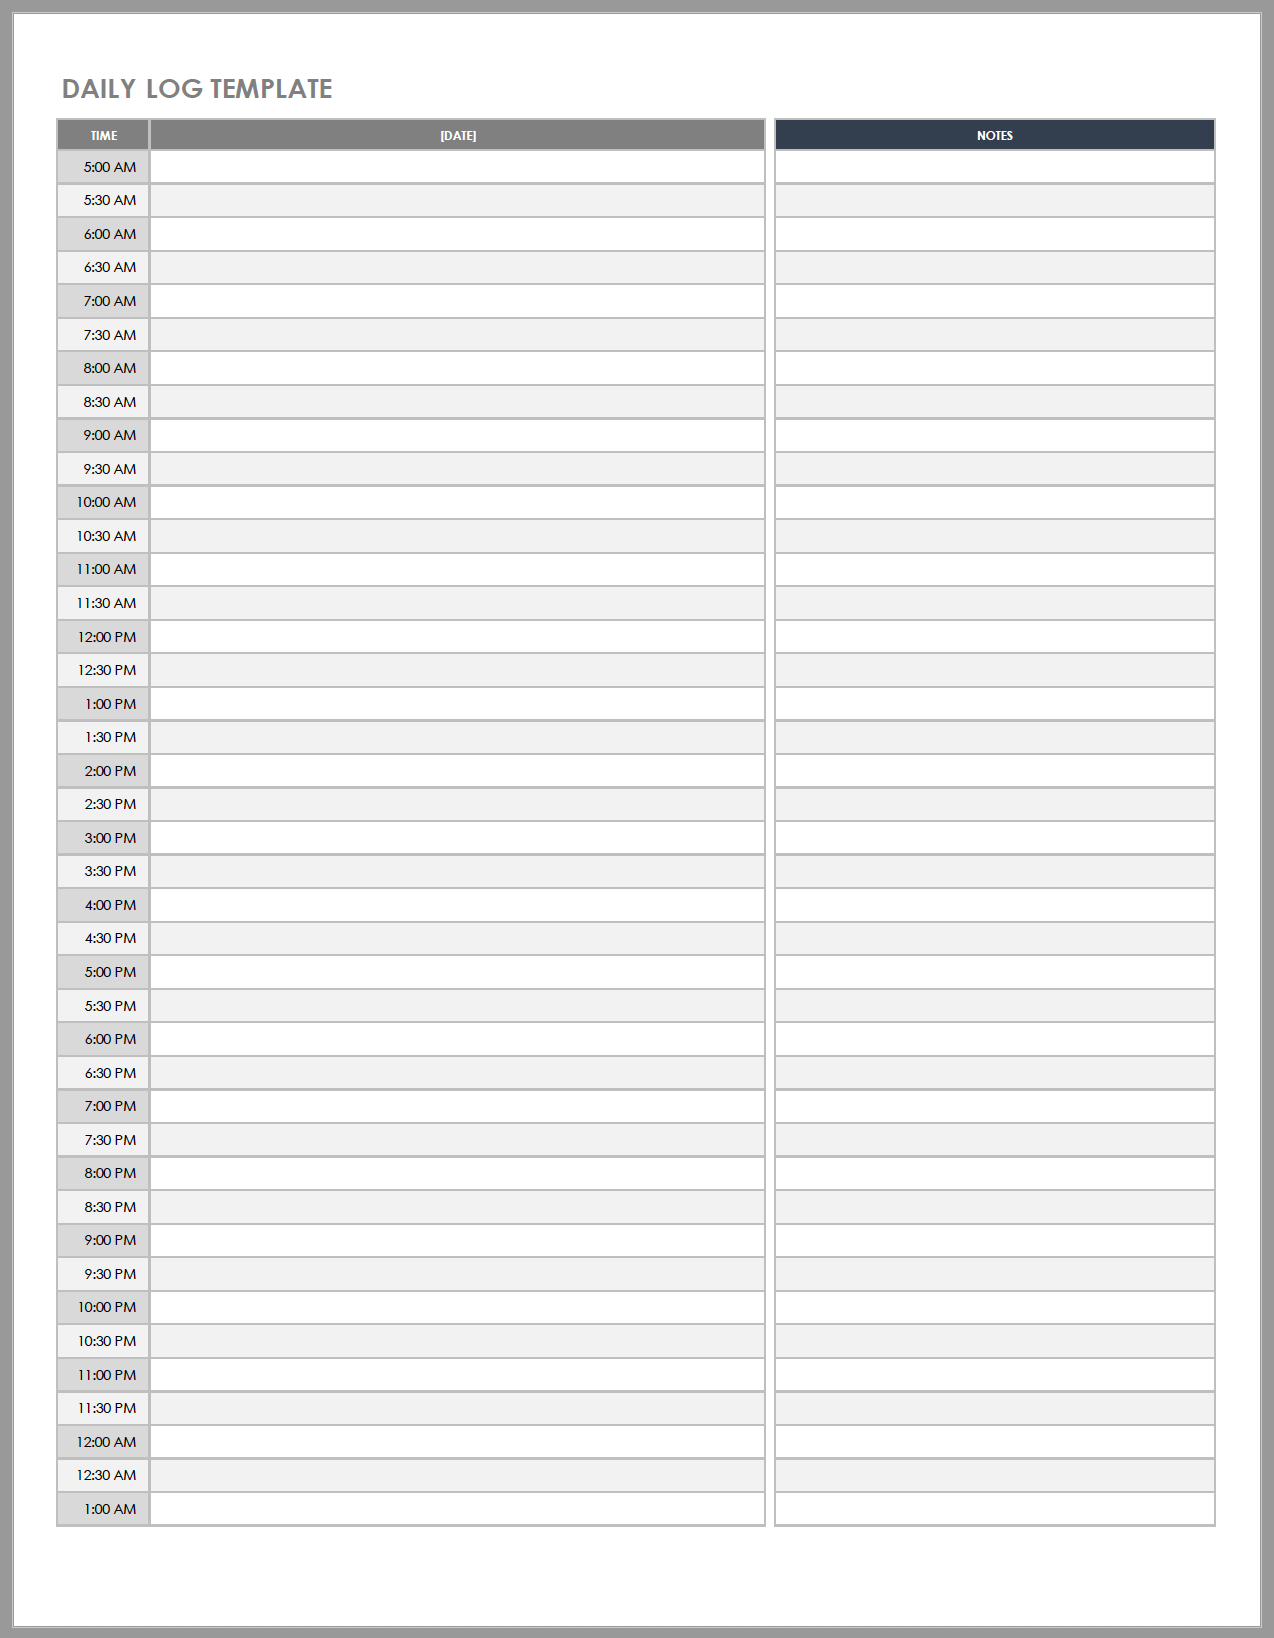 Daily Logs Template from www.smartsheet.com